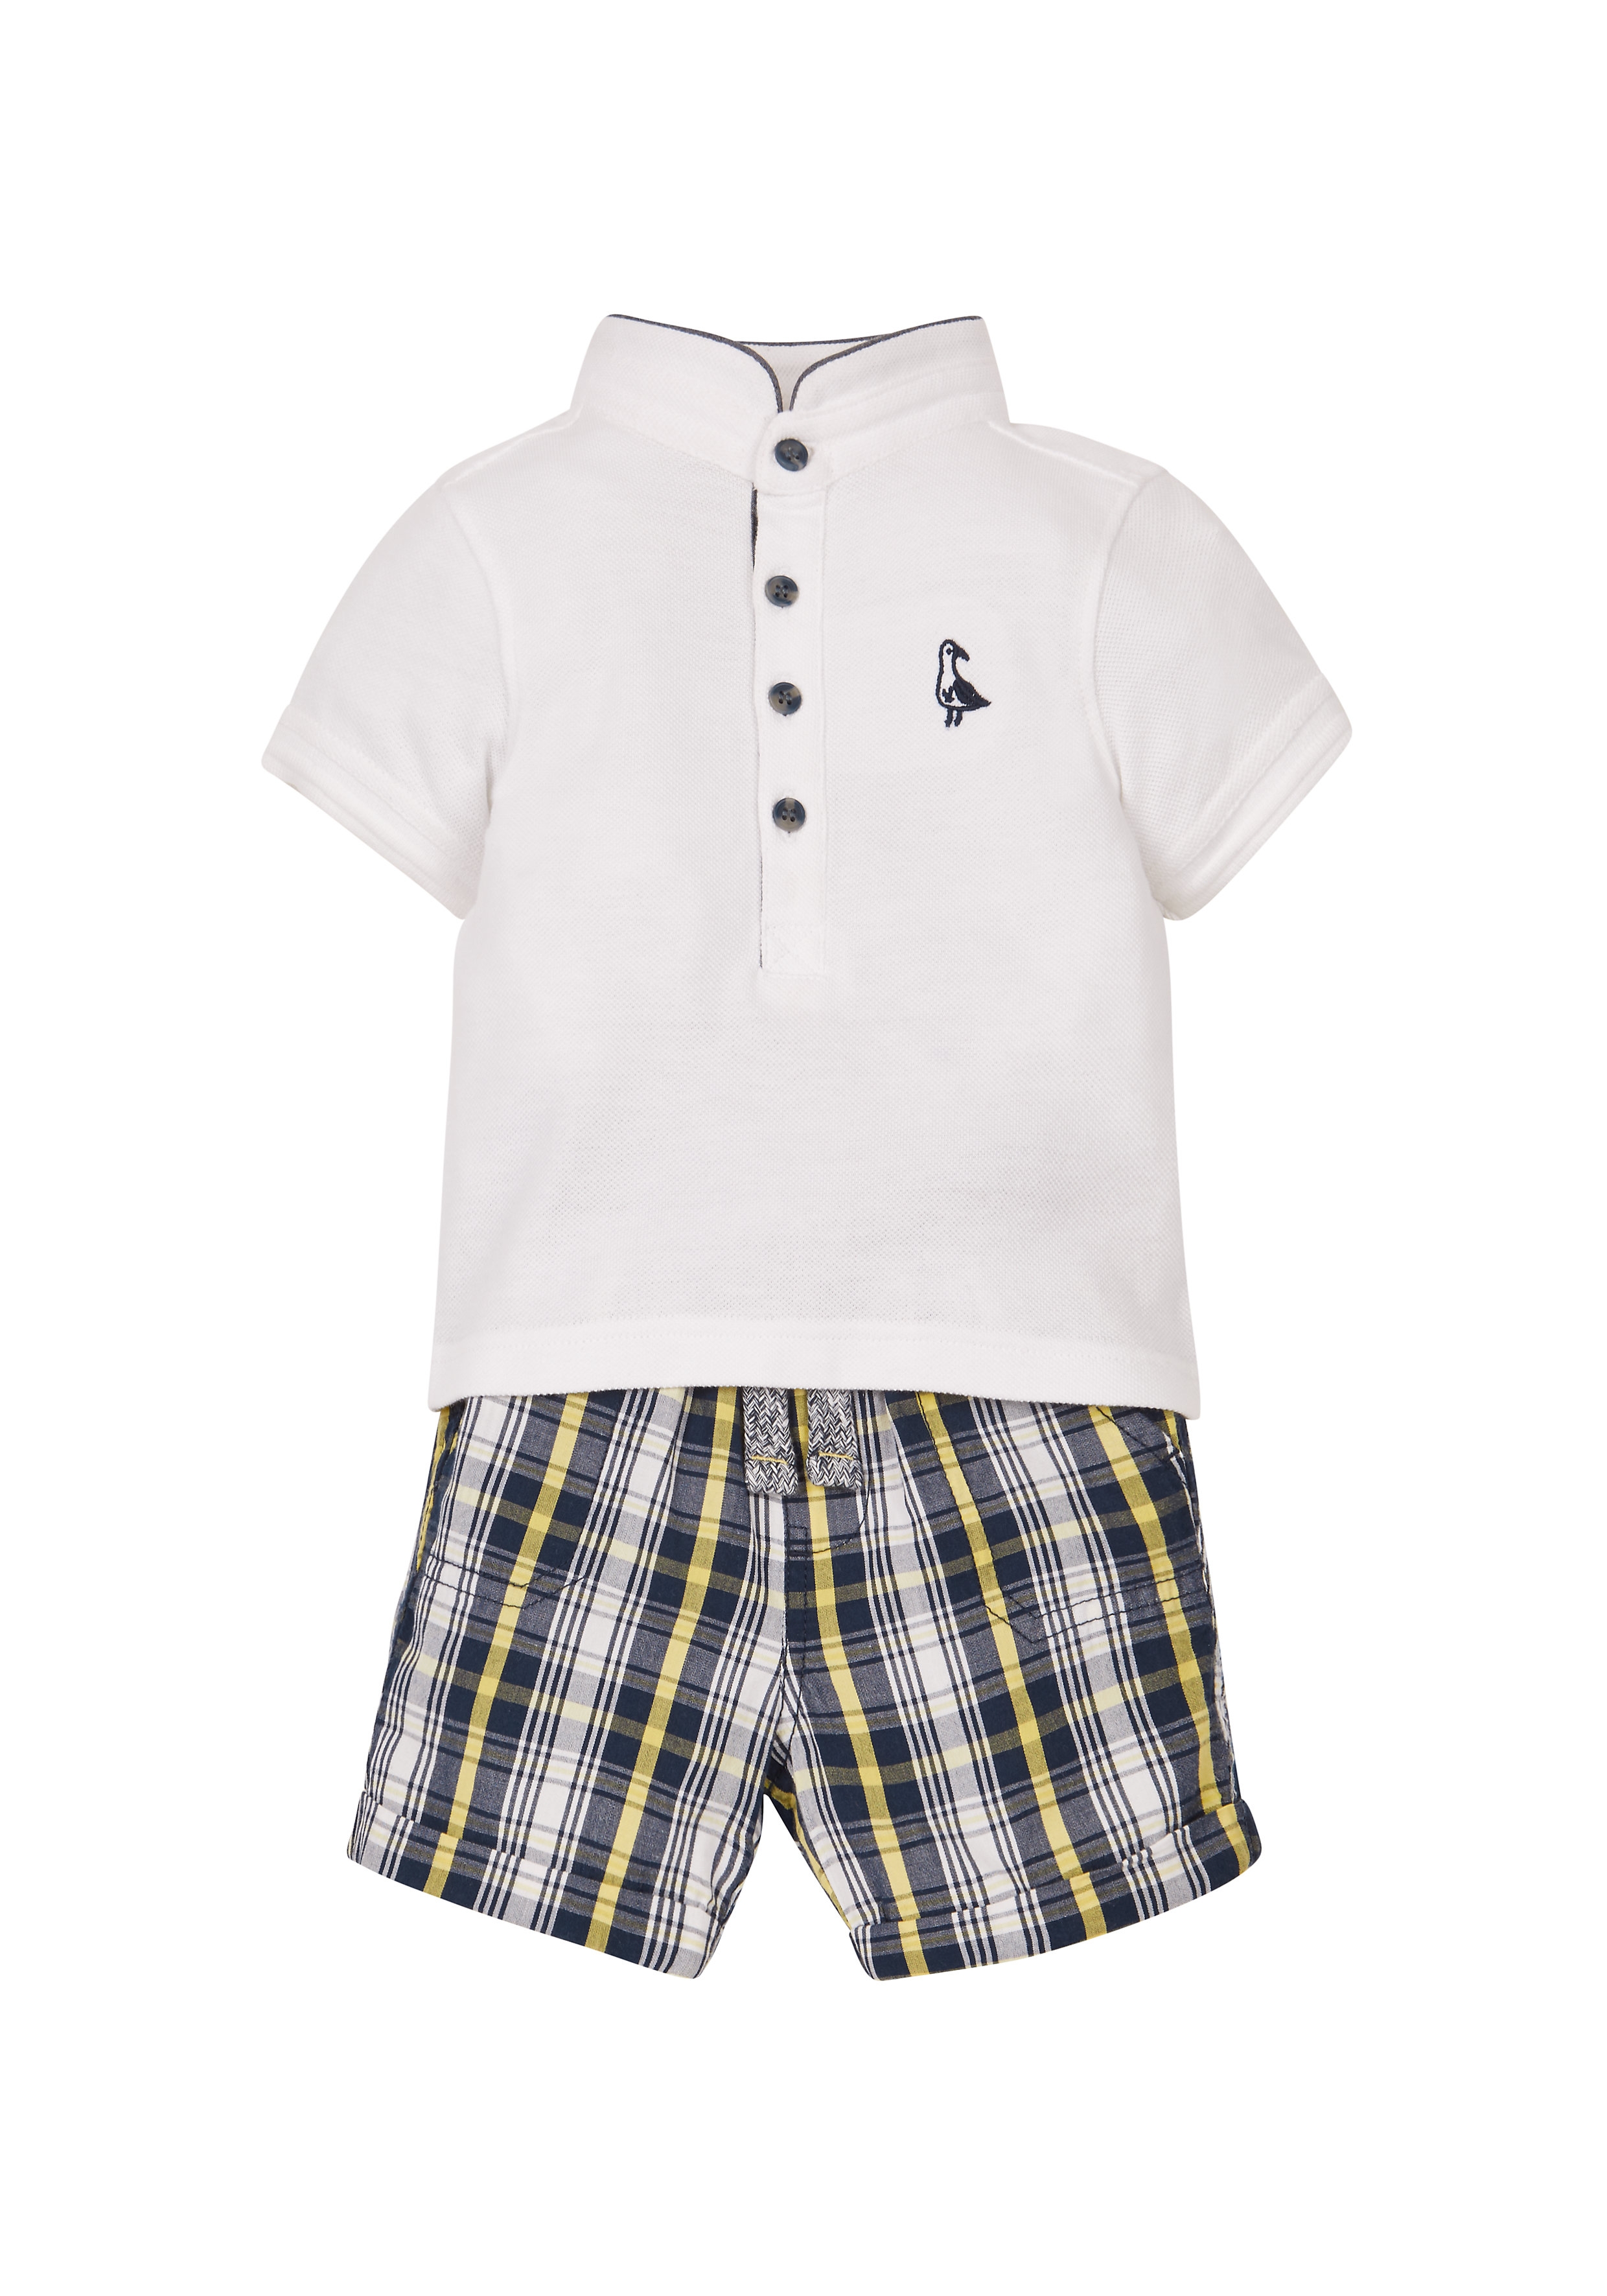 Mothercare | Boys Half Sleeves Polo T-Shirt And Shorts Set - Multicolor